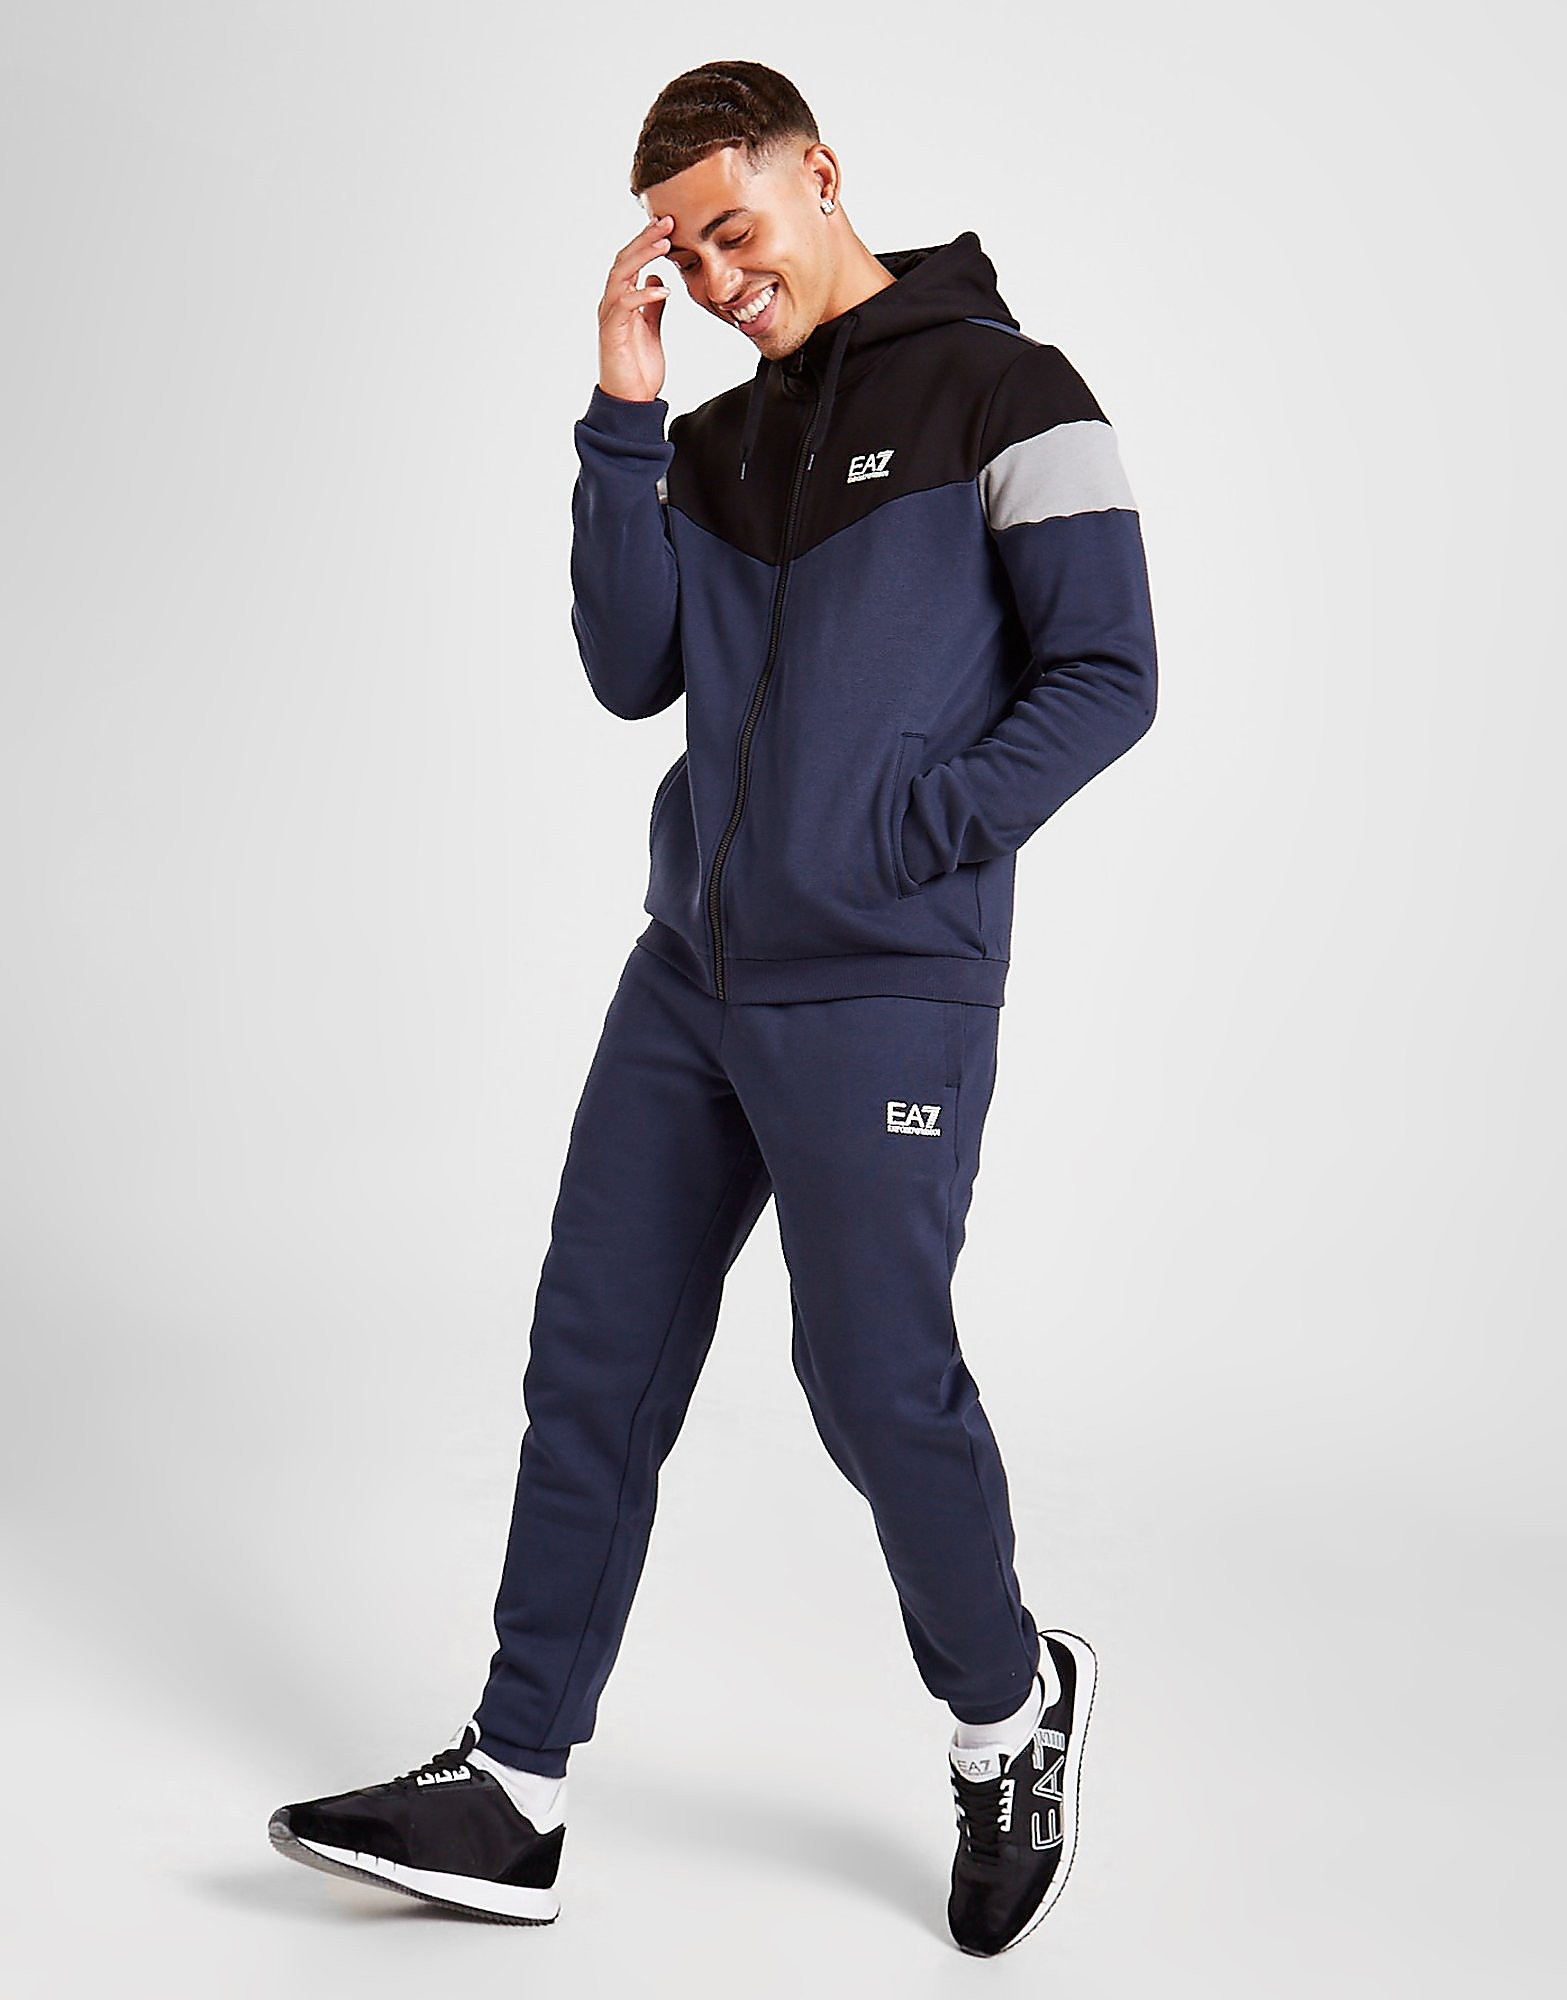 Emporio Armani EA7 Colour Block Full Zip Hoodie Tracksuit - Only at JD - Azul - Mens, Azul